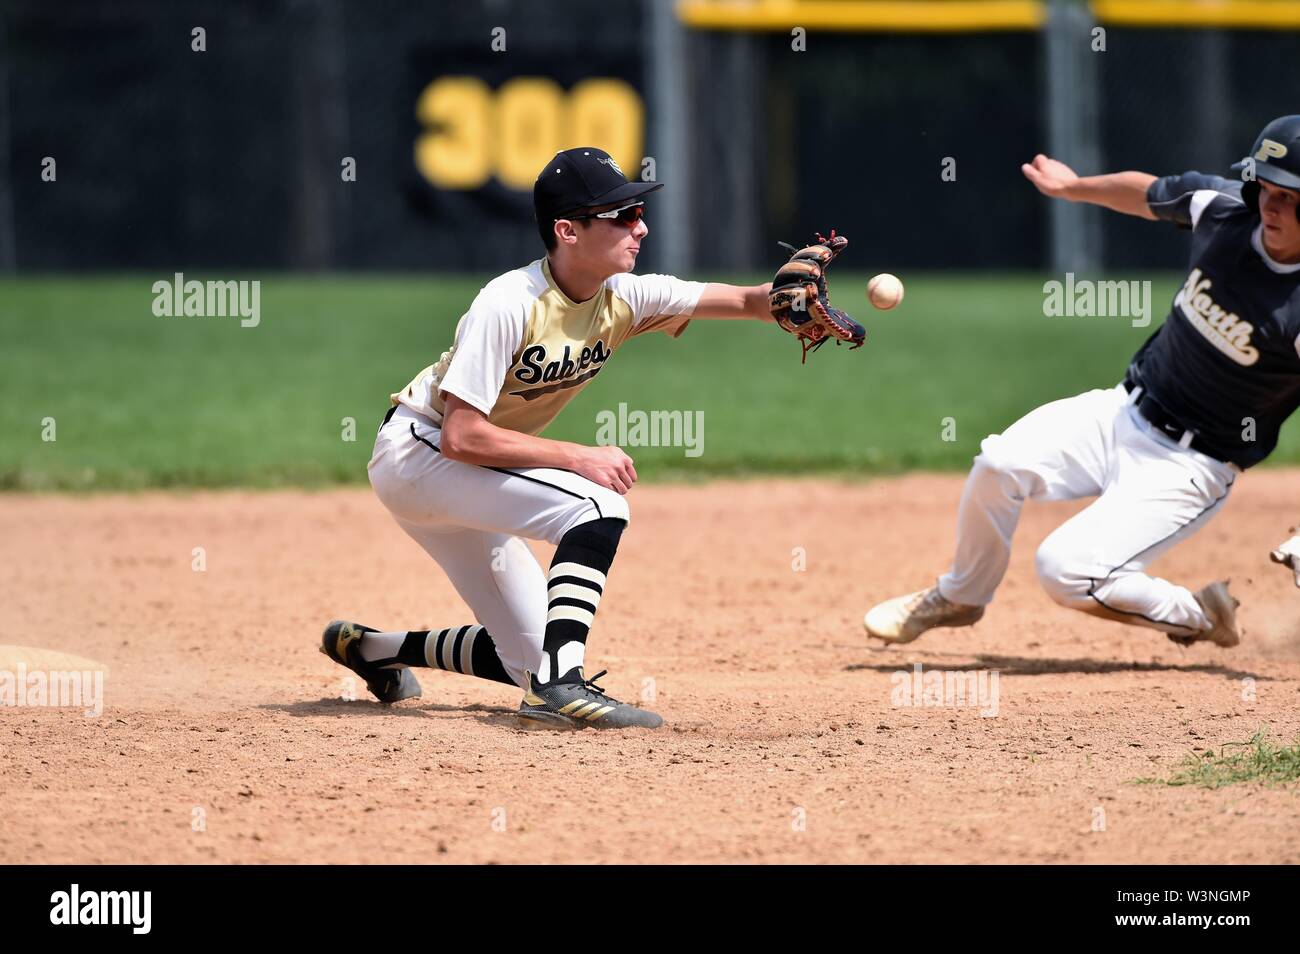 Second baseman taking a throw from the catcher in an effort to  keep the runner from stealing second base. USA Stock Photo